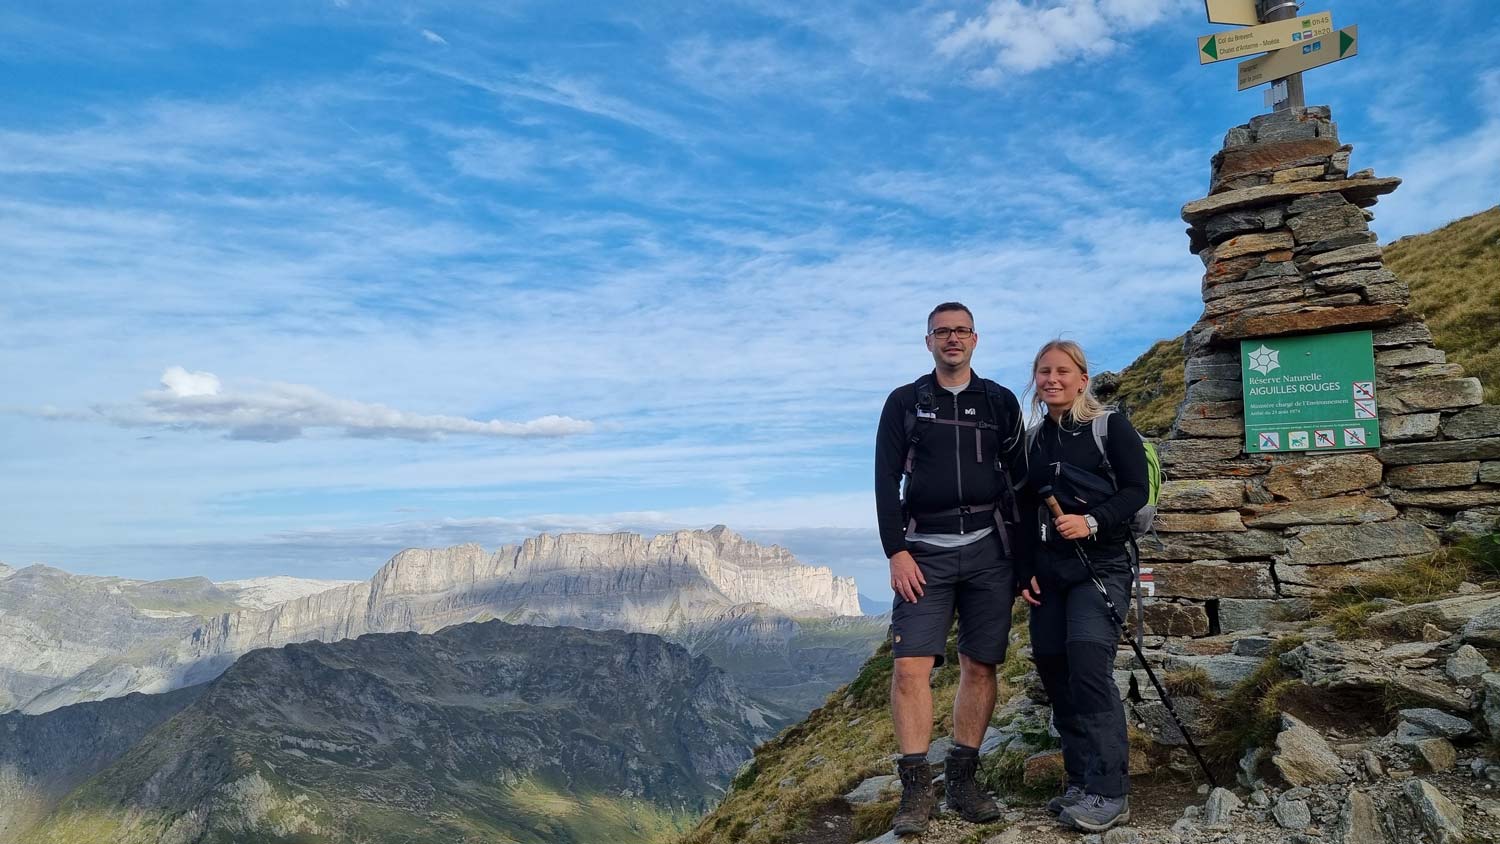 Two people standing in front of the view of the Anterne Mountain